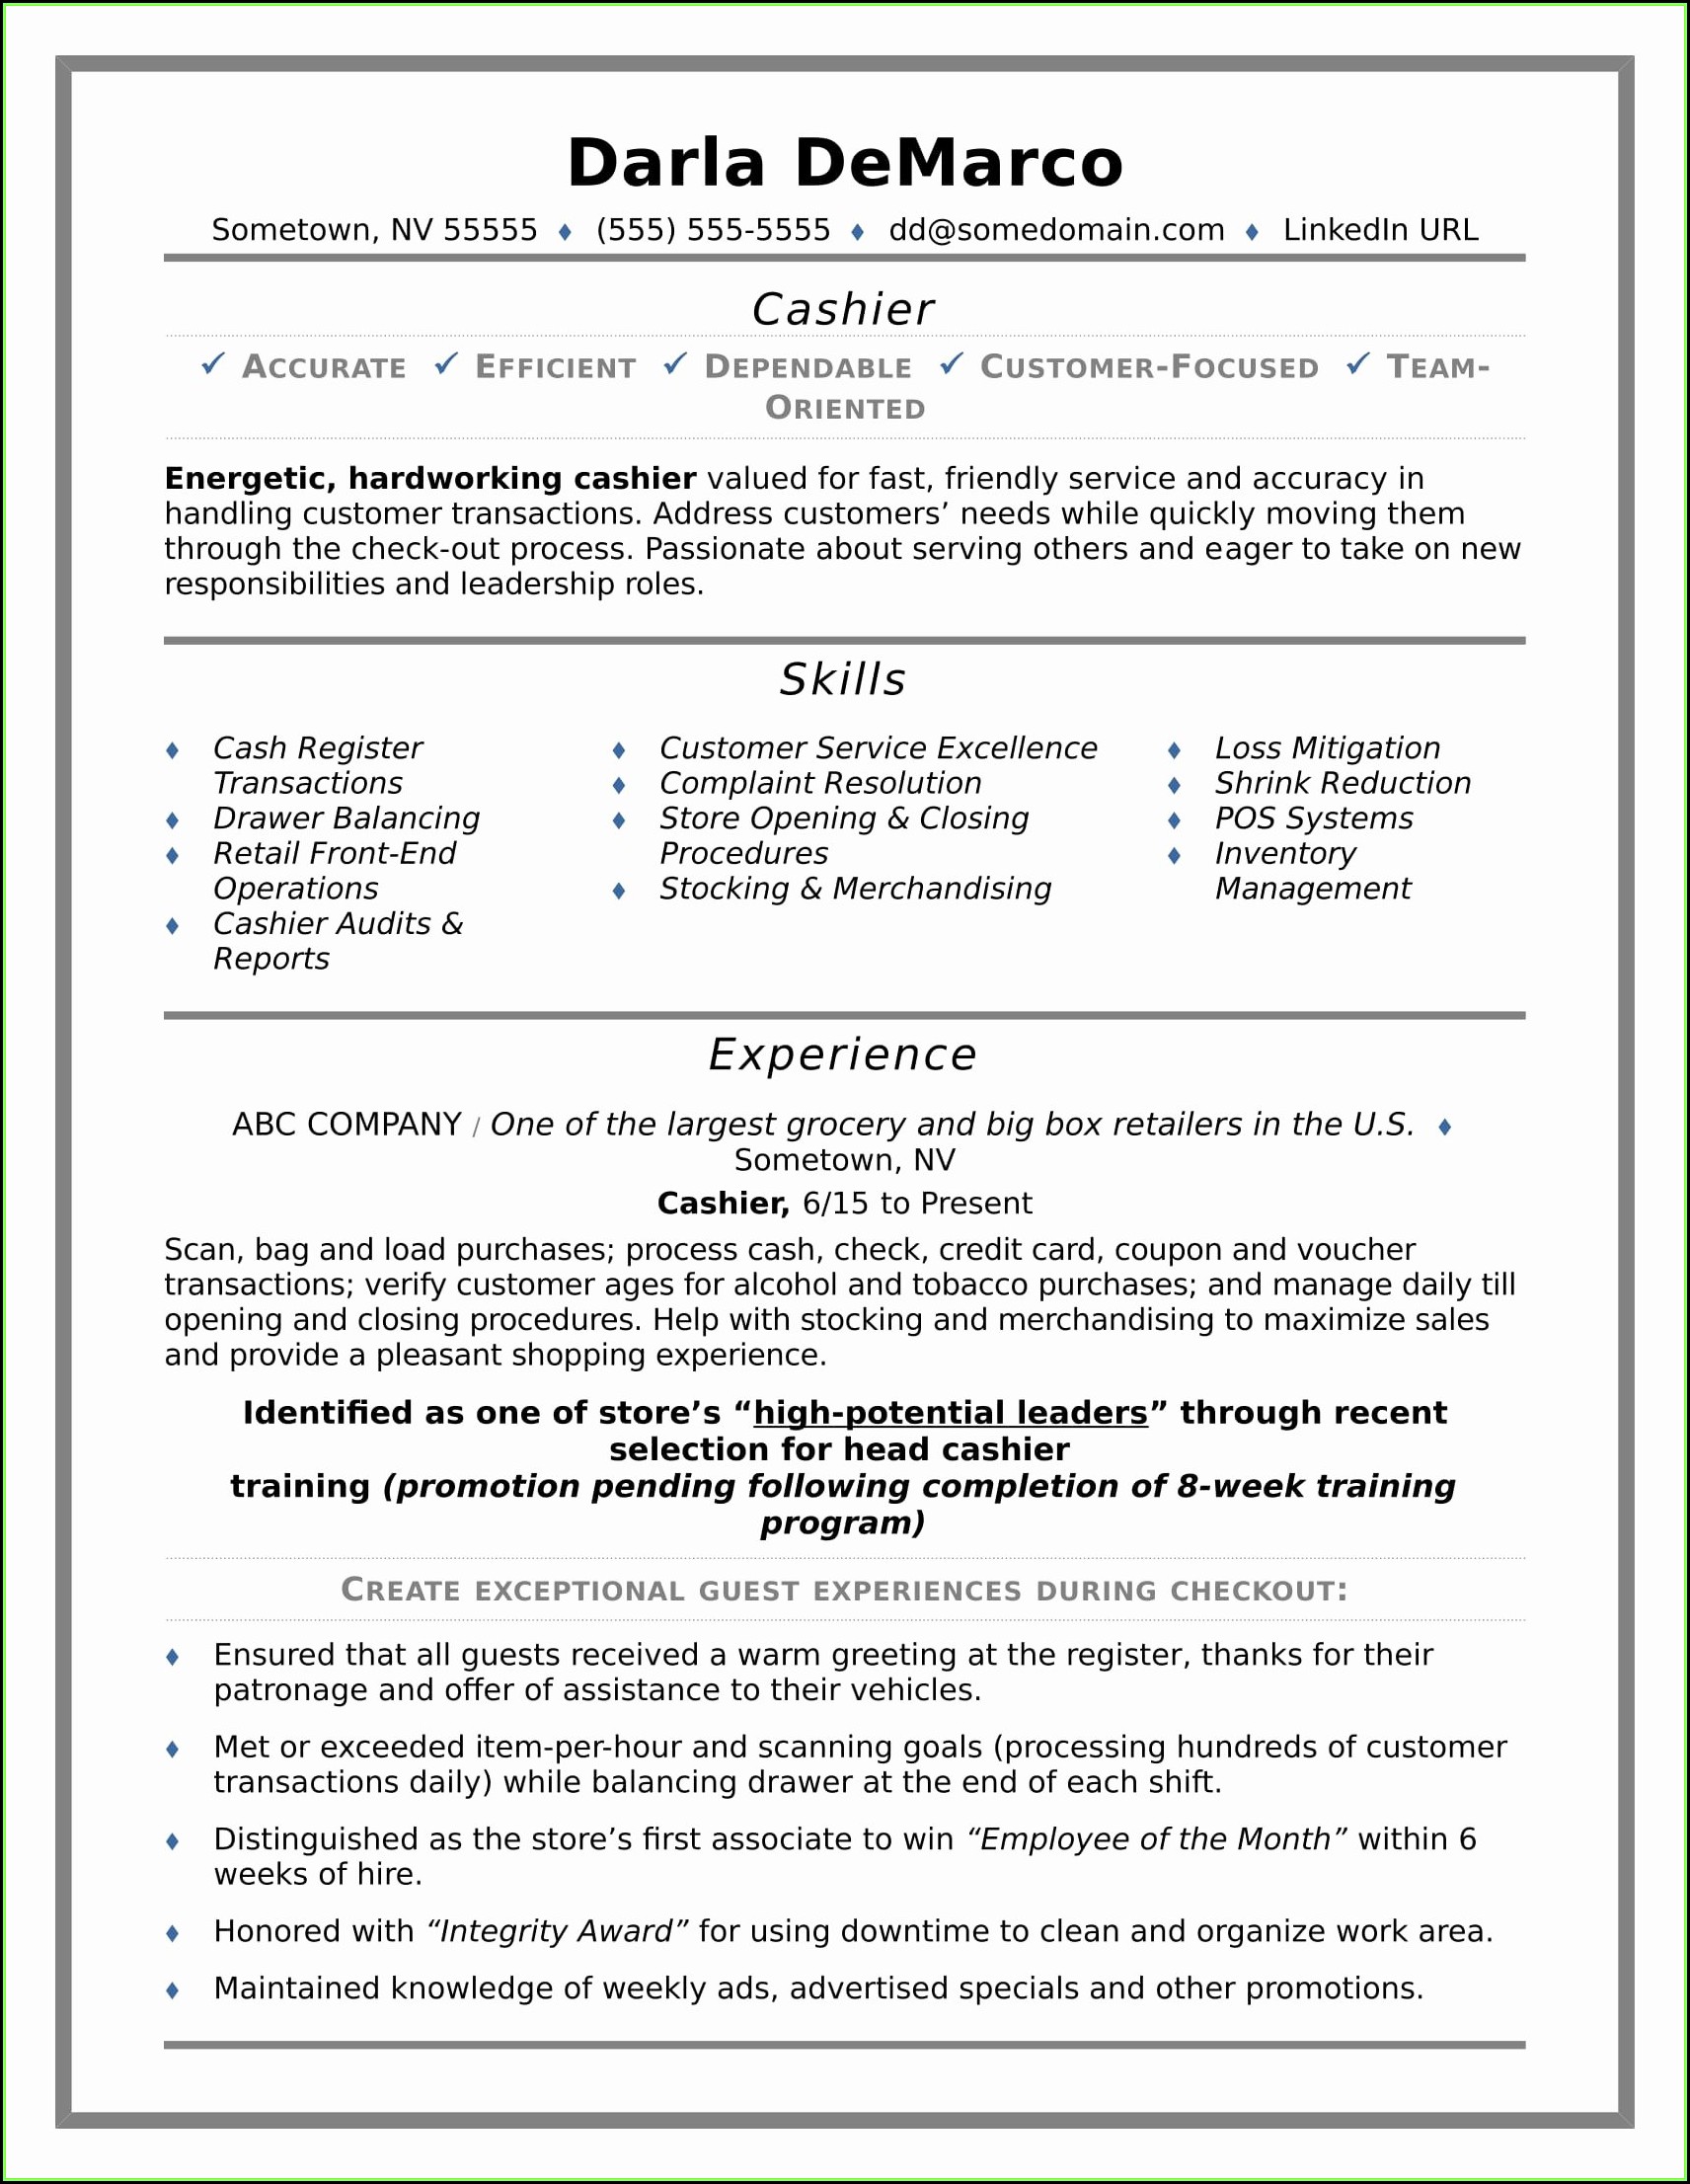 Monster Resume Writing Service Review